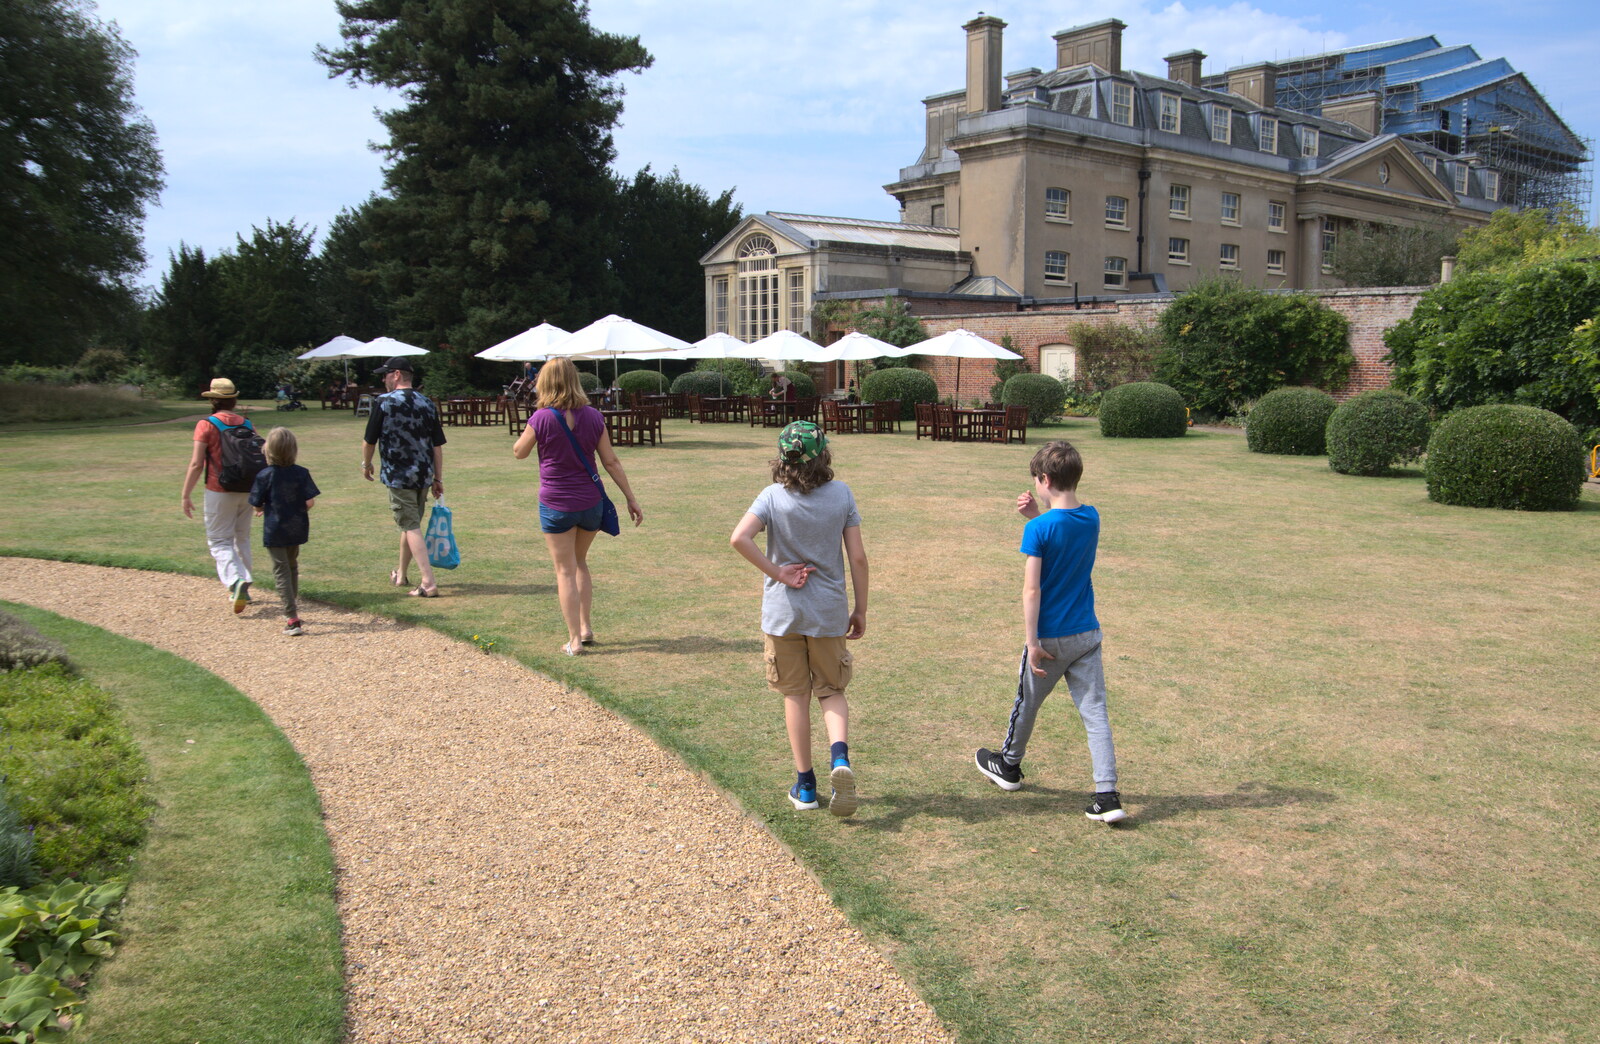 We wander through the hotel's grounds from Back at Ickworth, and Oaksmere with the G-Unit, Horringer and Brome, Suffolk - 8th August 2020